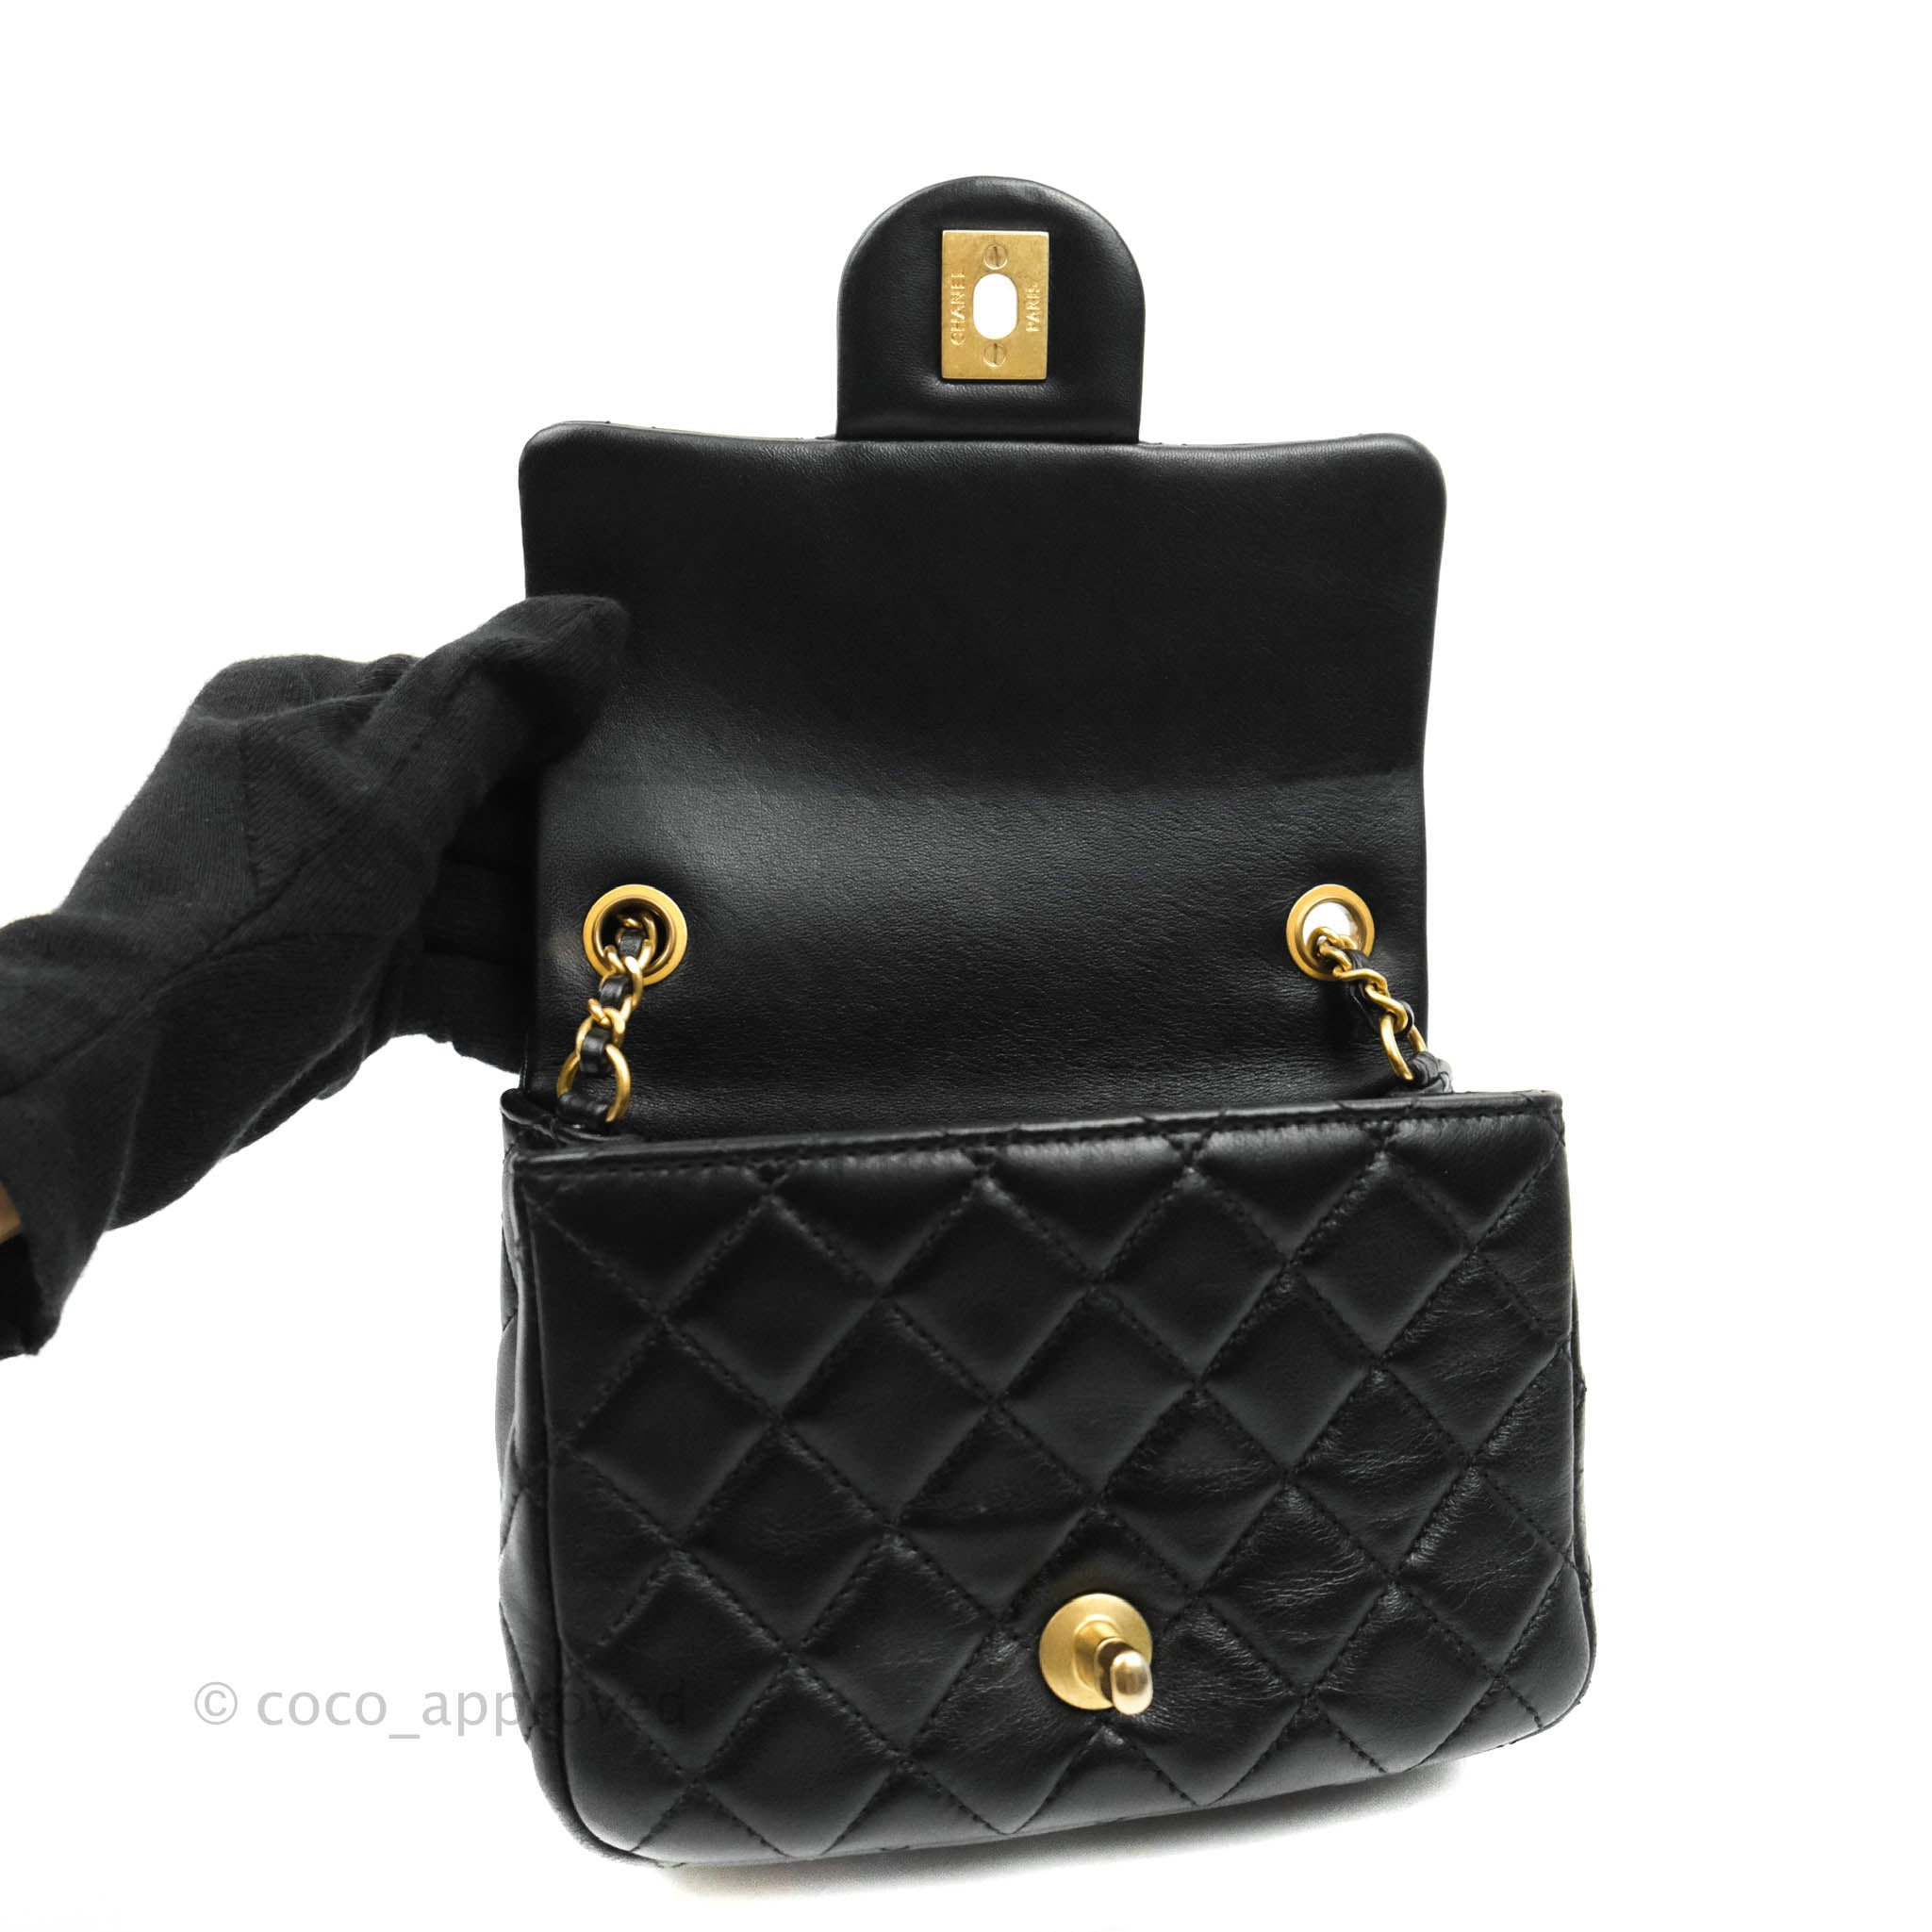 Chanel Black Quilted Lambskin Mini Square Classic Flap Bag